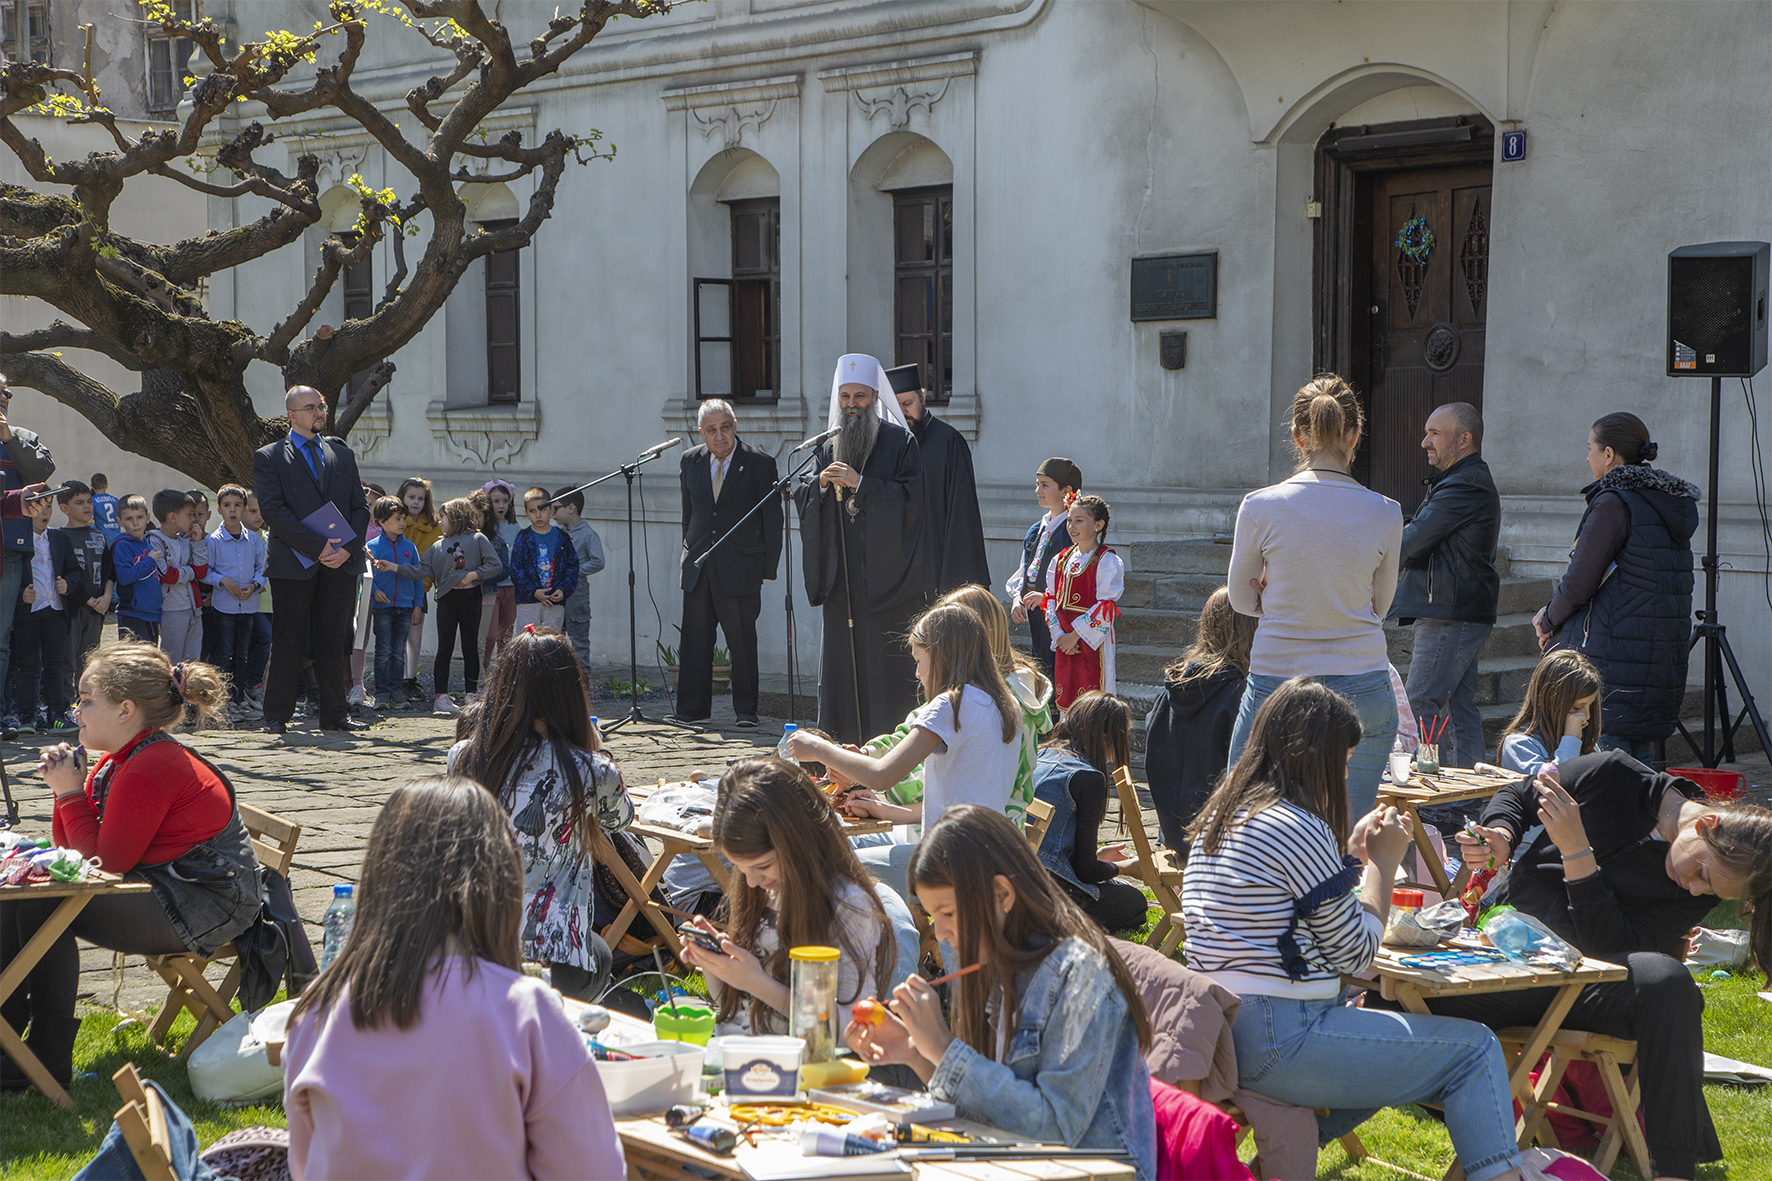 The 24th manifestation “Children Easter Magic”, under the patronage of Patriarch Porfirije, Crown Prince Alexander and the City of Belgrade